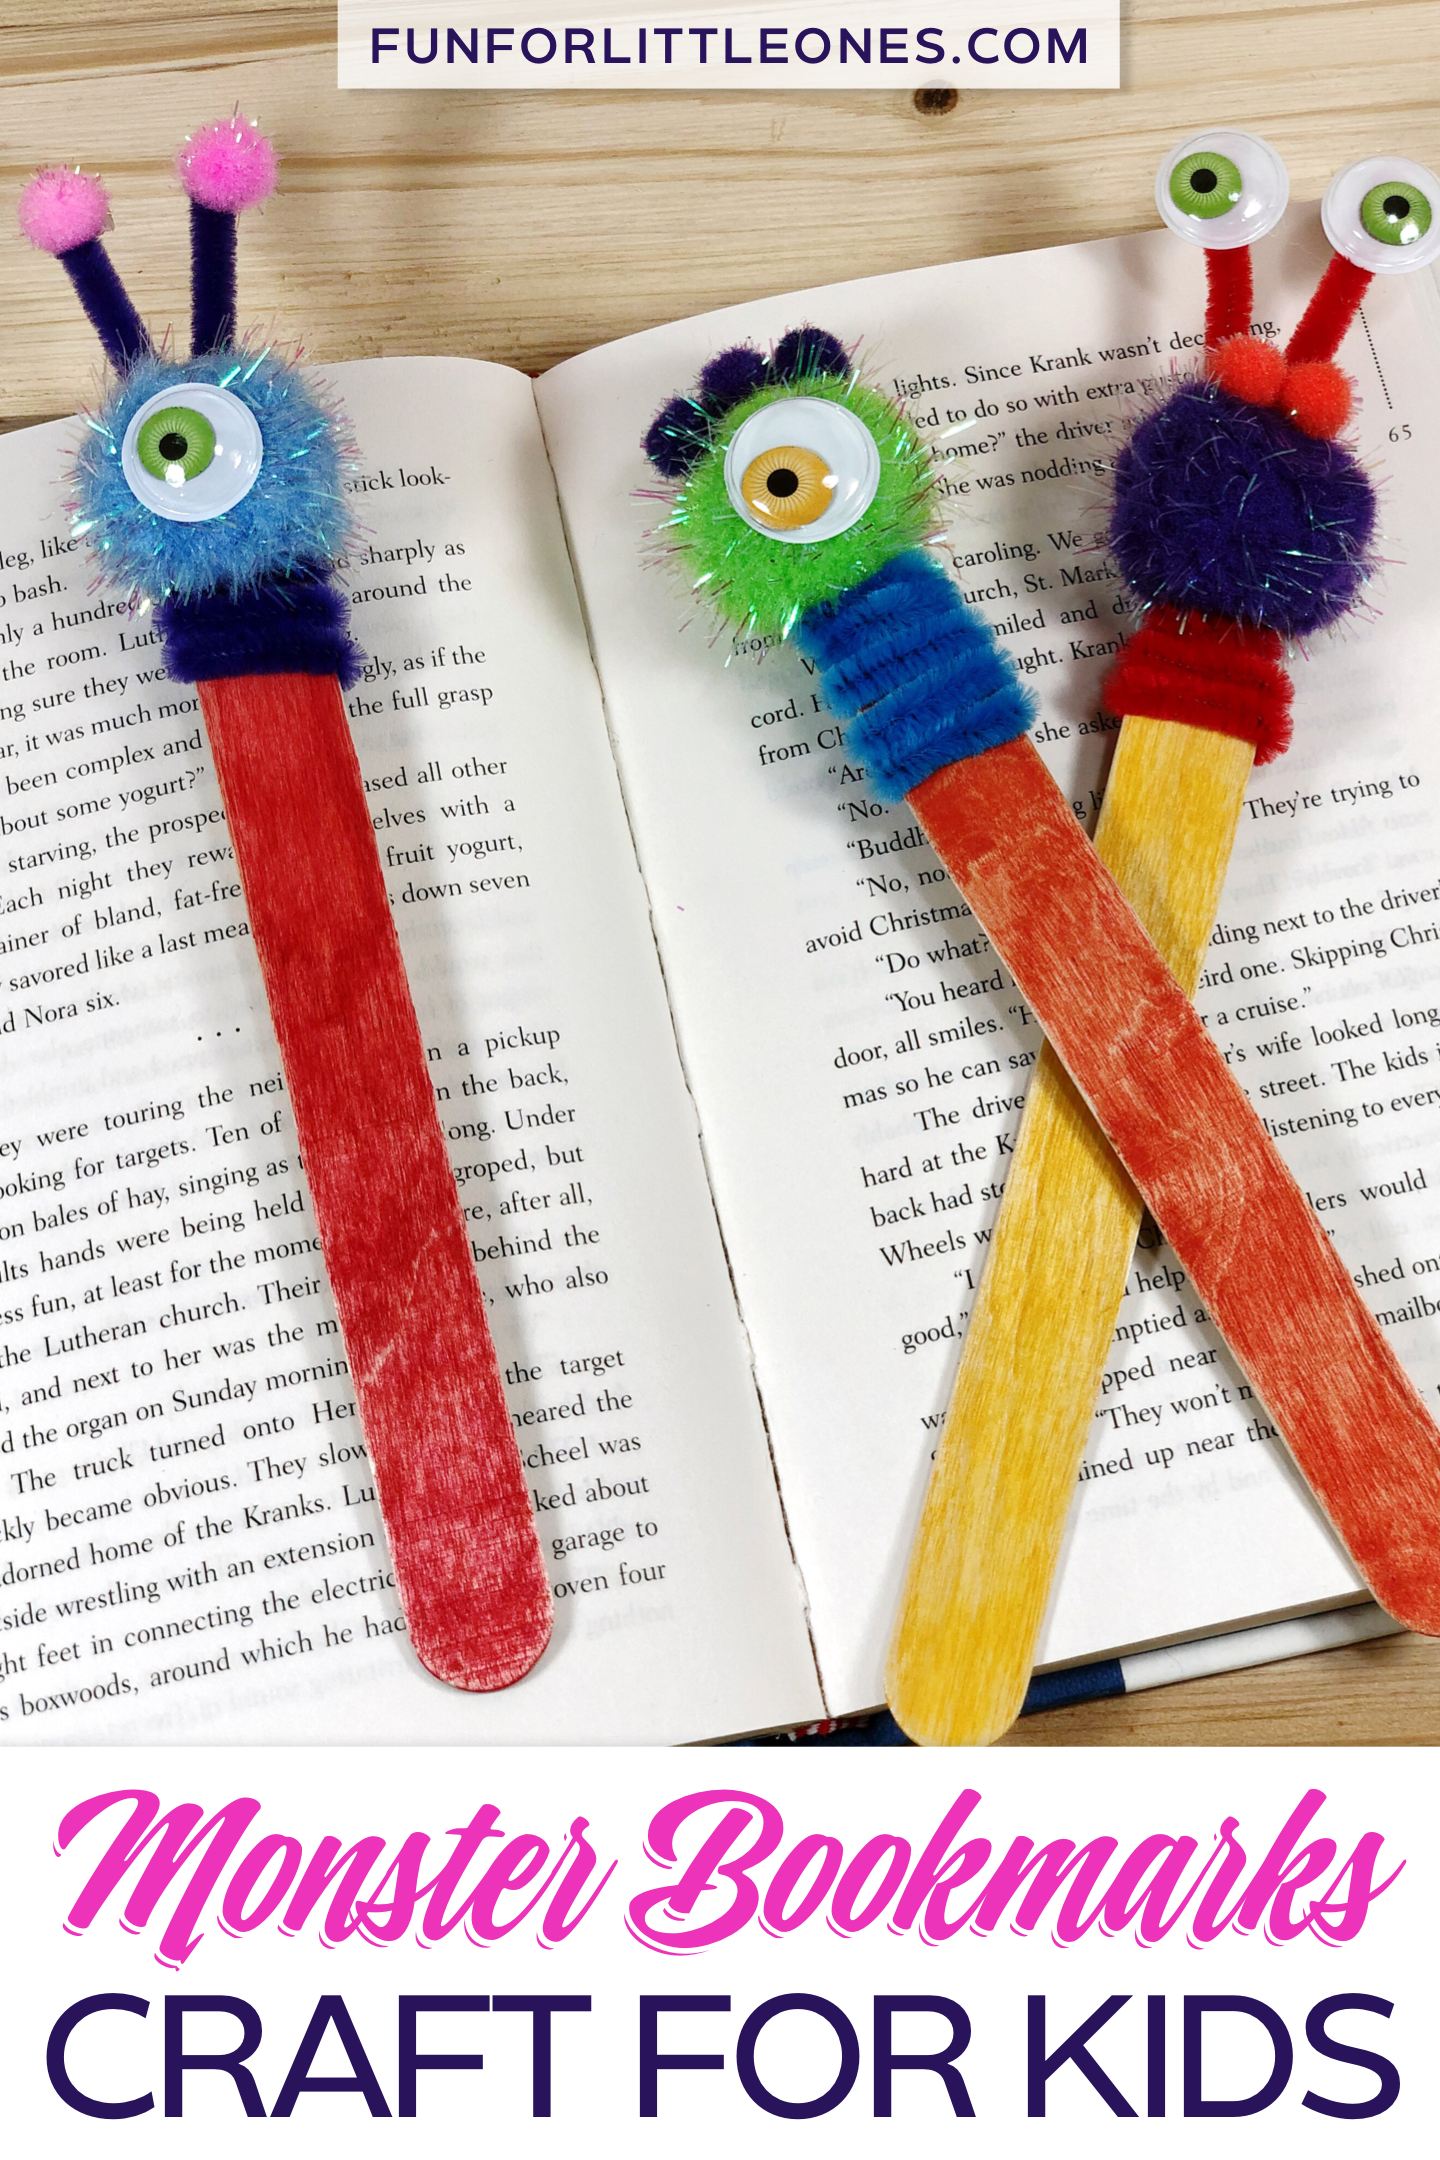 Fun & Easy Monster Bookmarks Craft for Kids - Fun for Little Ones - Fun & Easy Monster Bookmarks Craft for Kids - Fun for Little Ones -   16 diy Kids basteln ideas